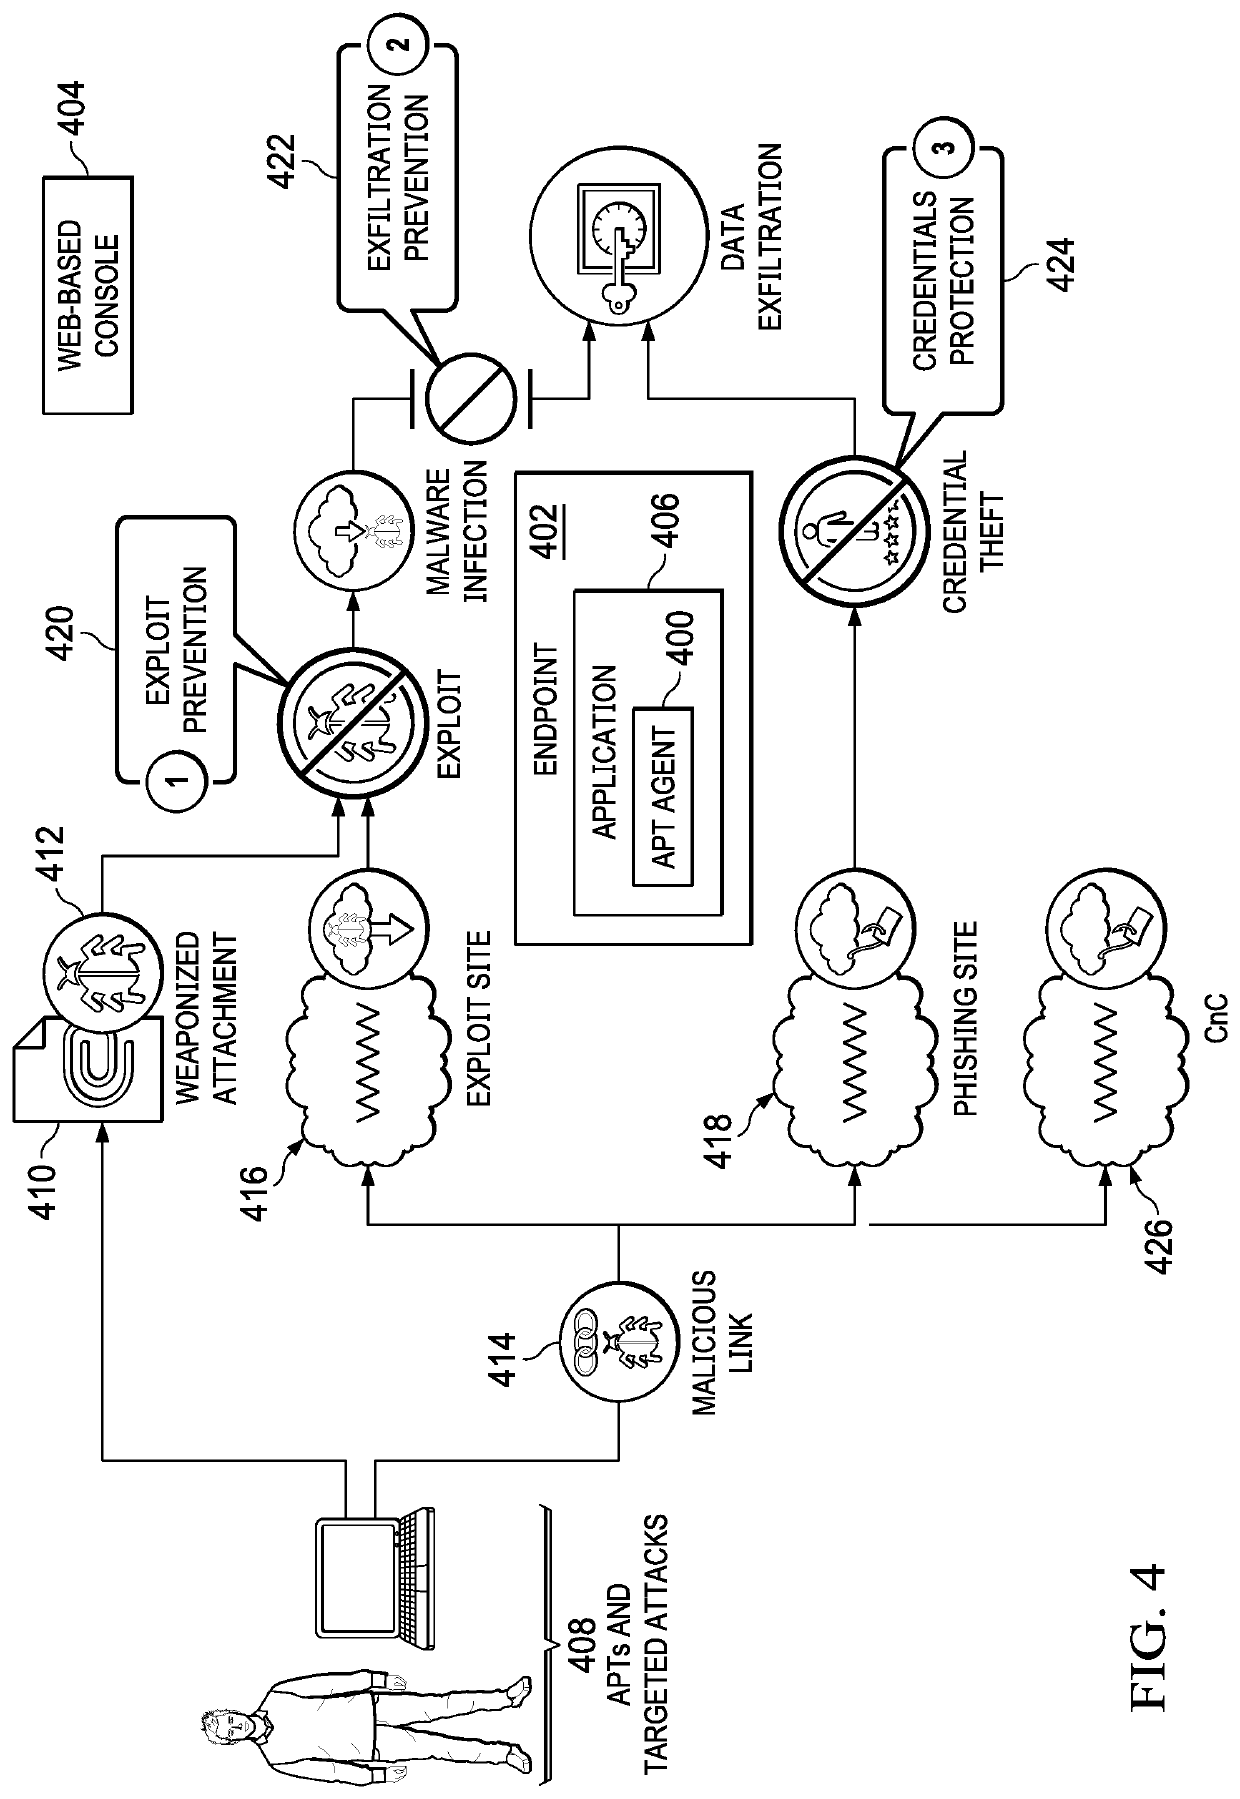 Iterative constraint solving in abstract graph matching for cyber incident reasoning